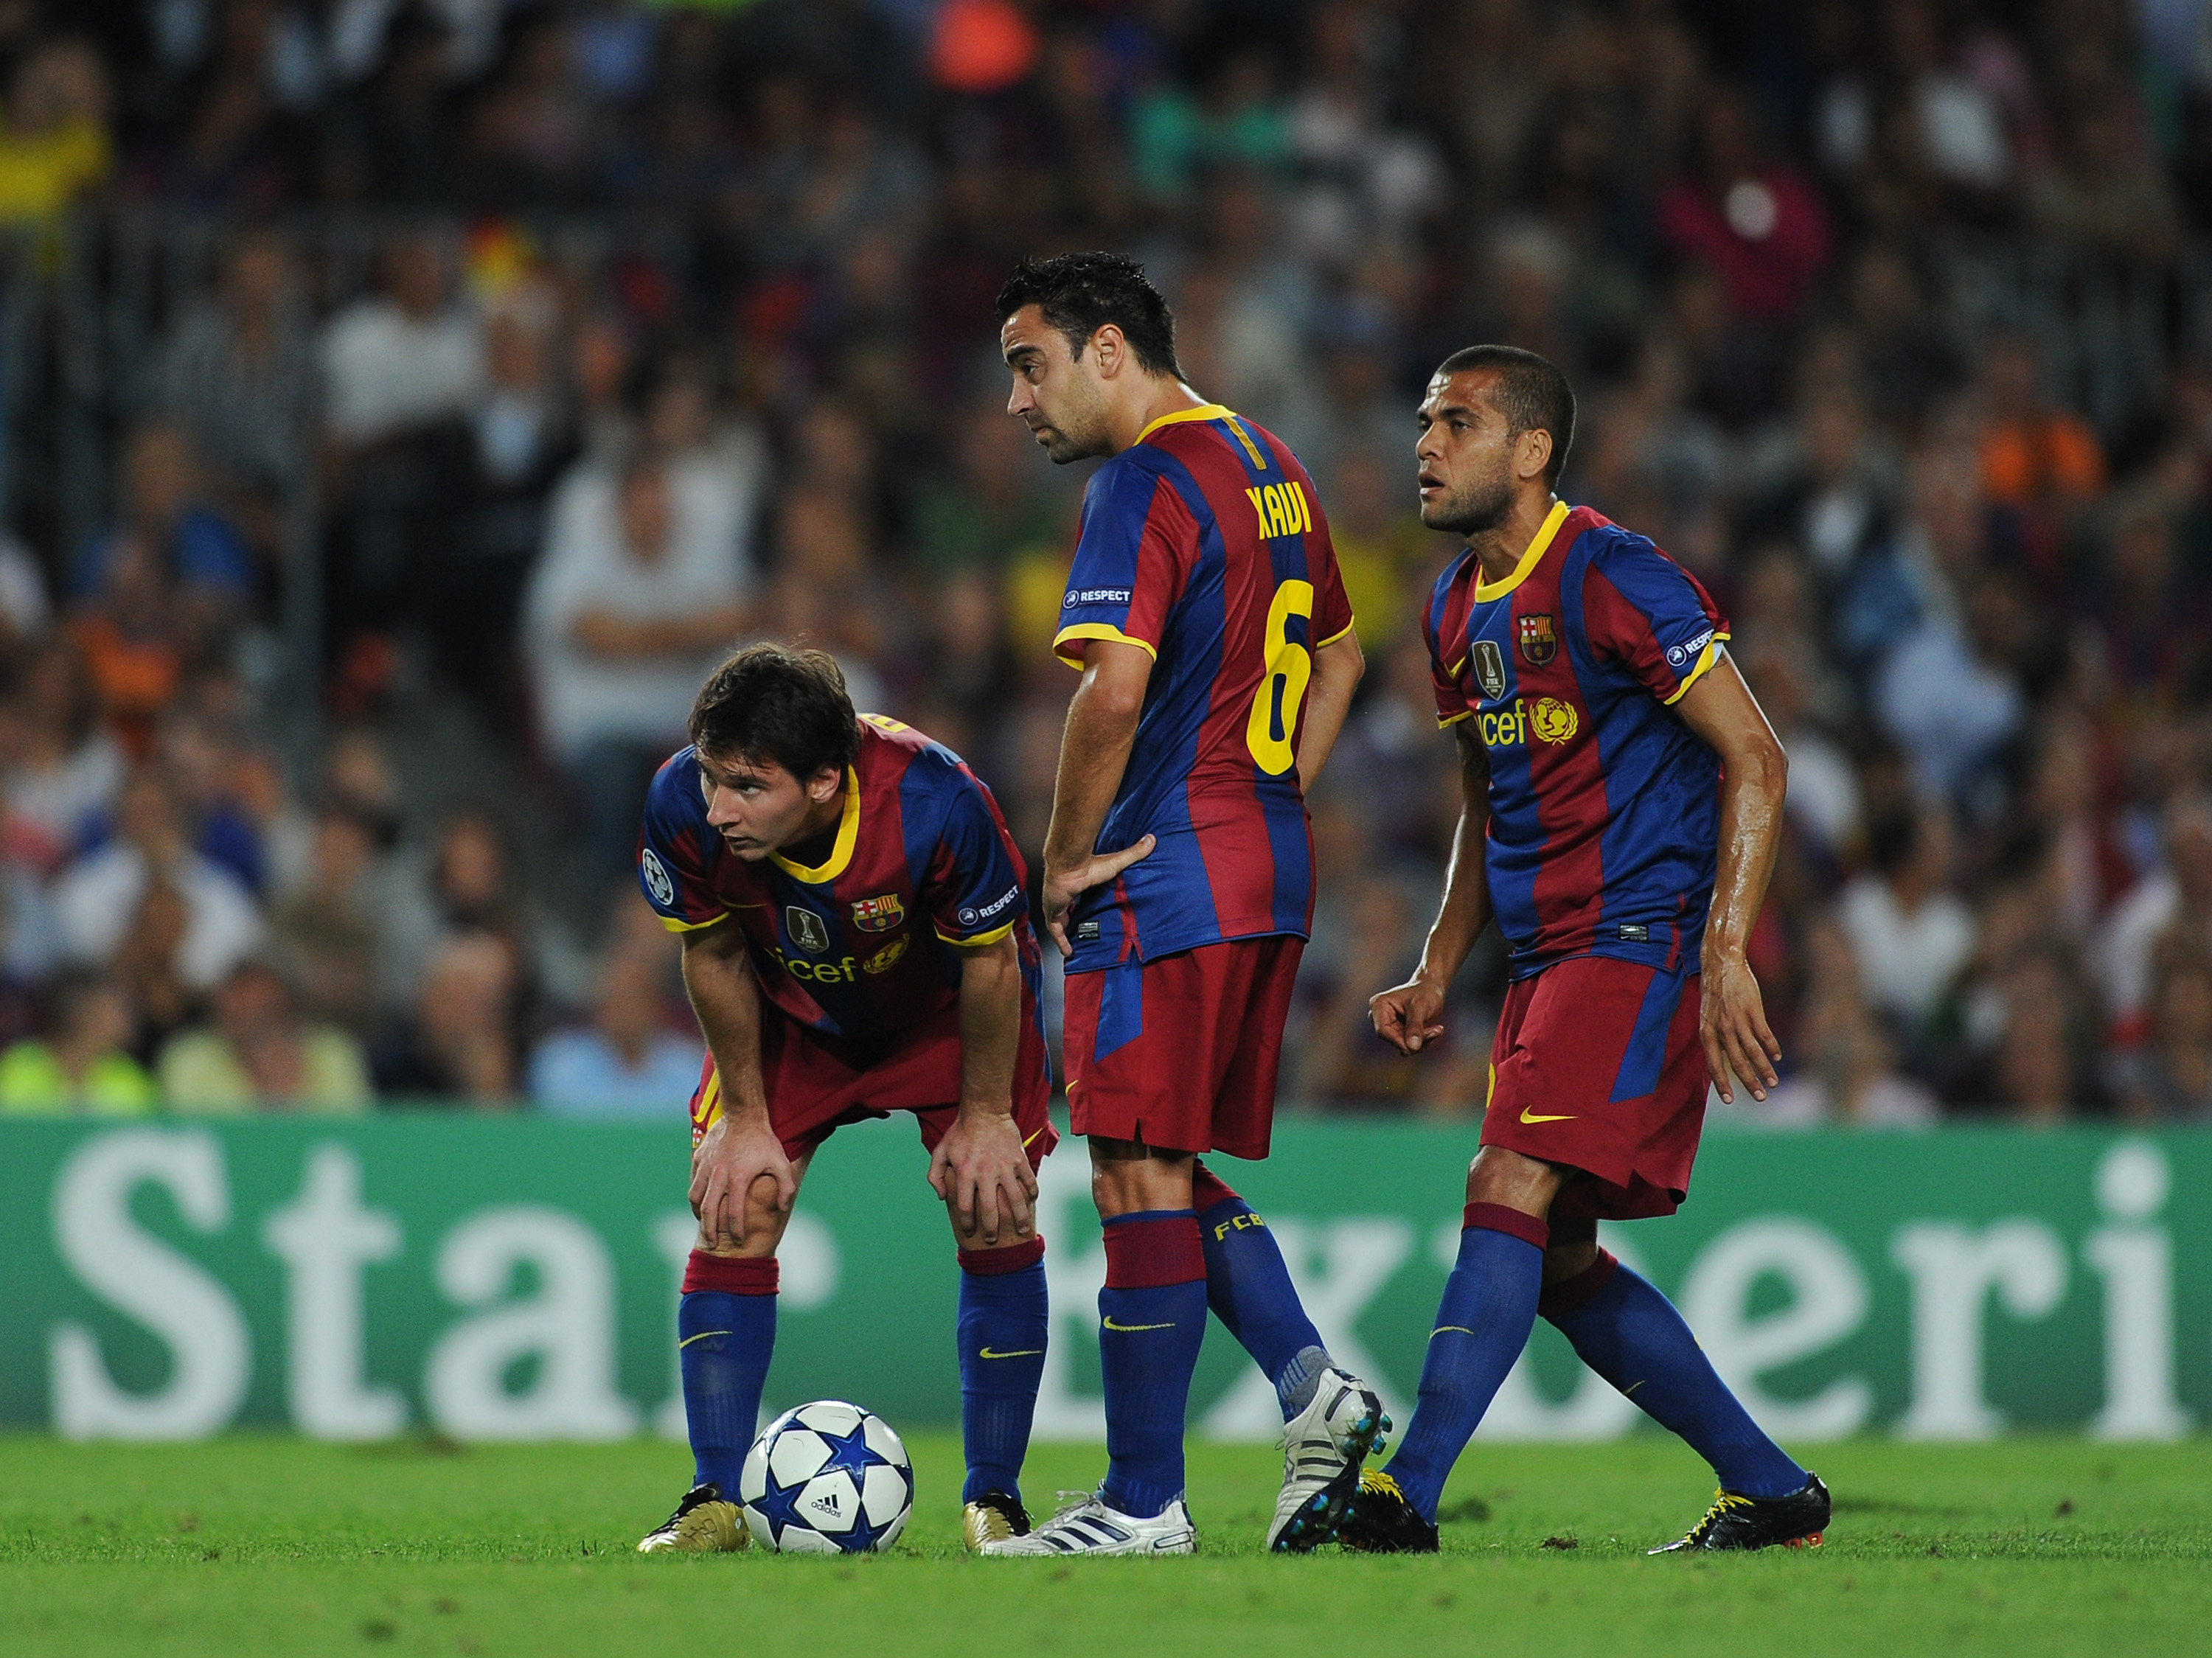 BARCELONA, SPAIN - SEPTEMBER 14:  Lionel Messi, Xavi Hernandez and Daniel Alves of Barcelona line up a free kick during the UEFA Champions League group D match between Barcelona and Panathinaikos on September 14, 2010 in Barcelona, Spain. Barcelona won th